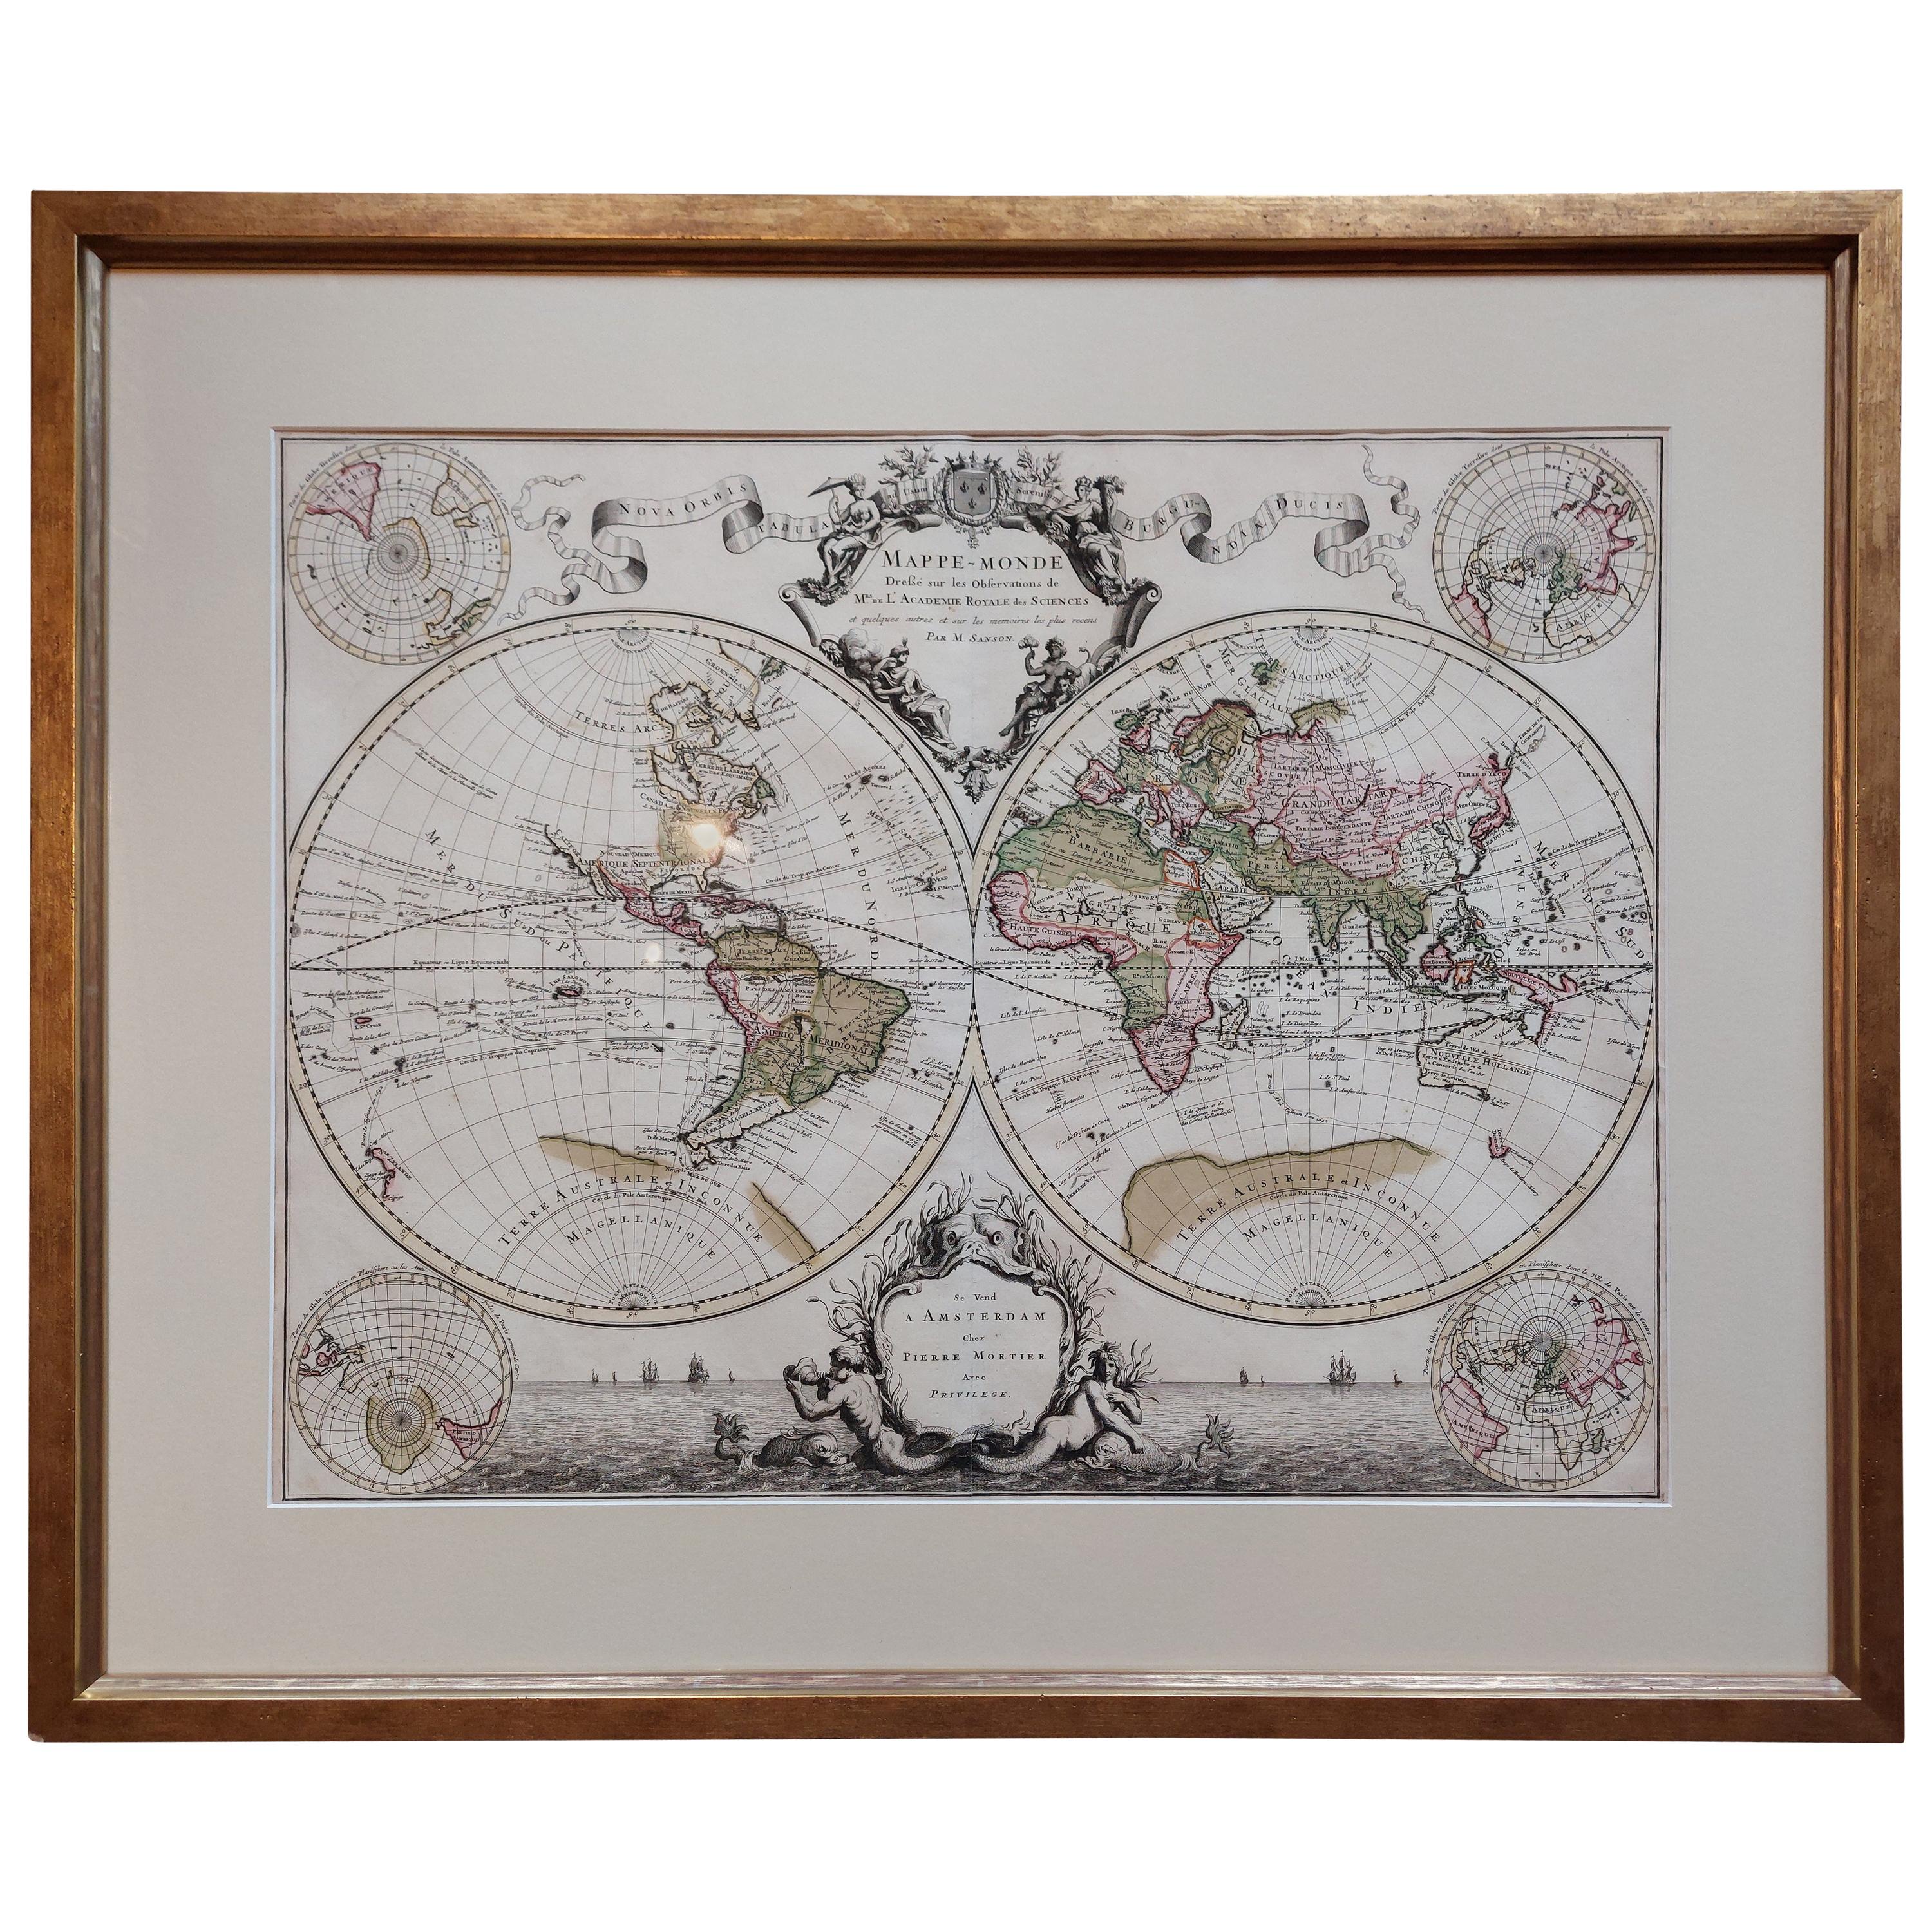 Original Antique Hand-colored World Map with or without Frame, '1696'